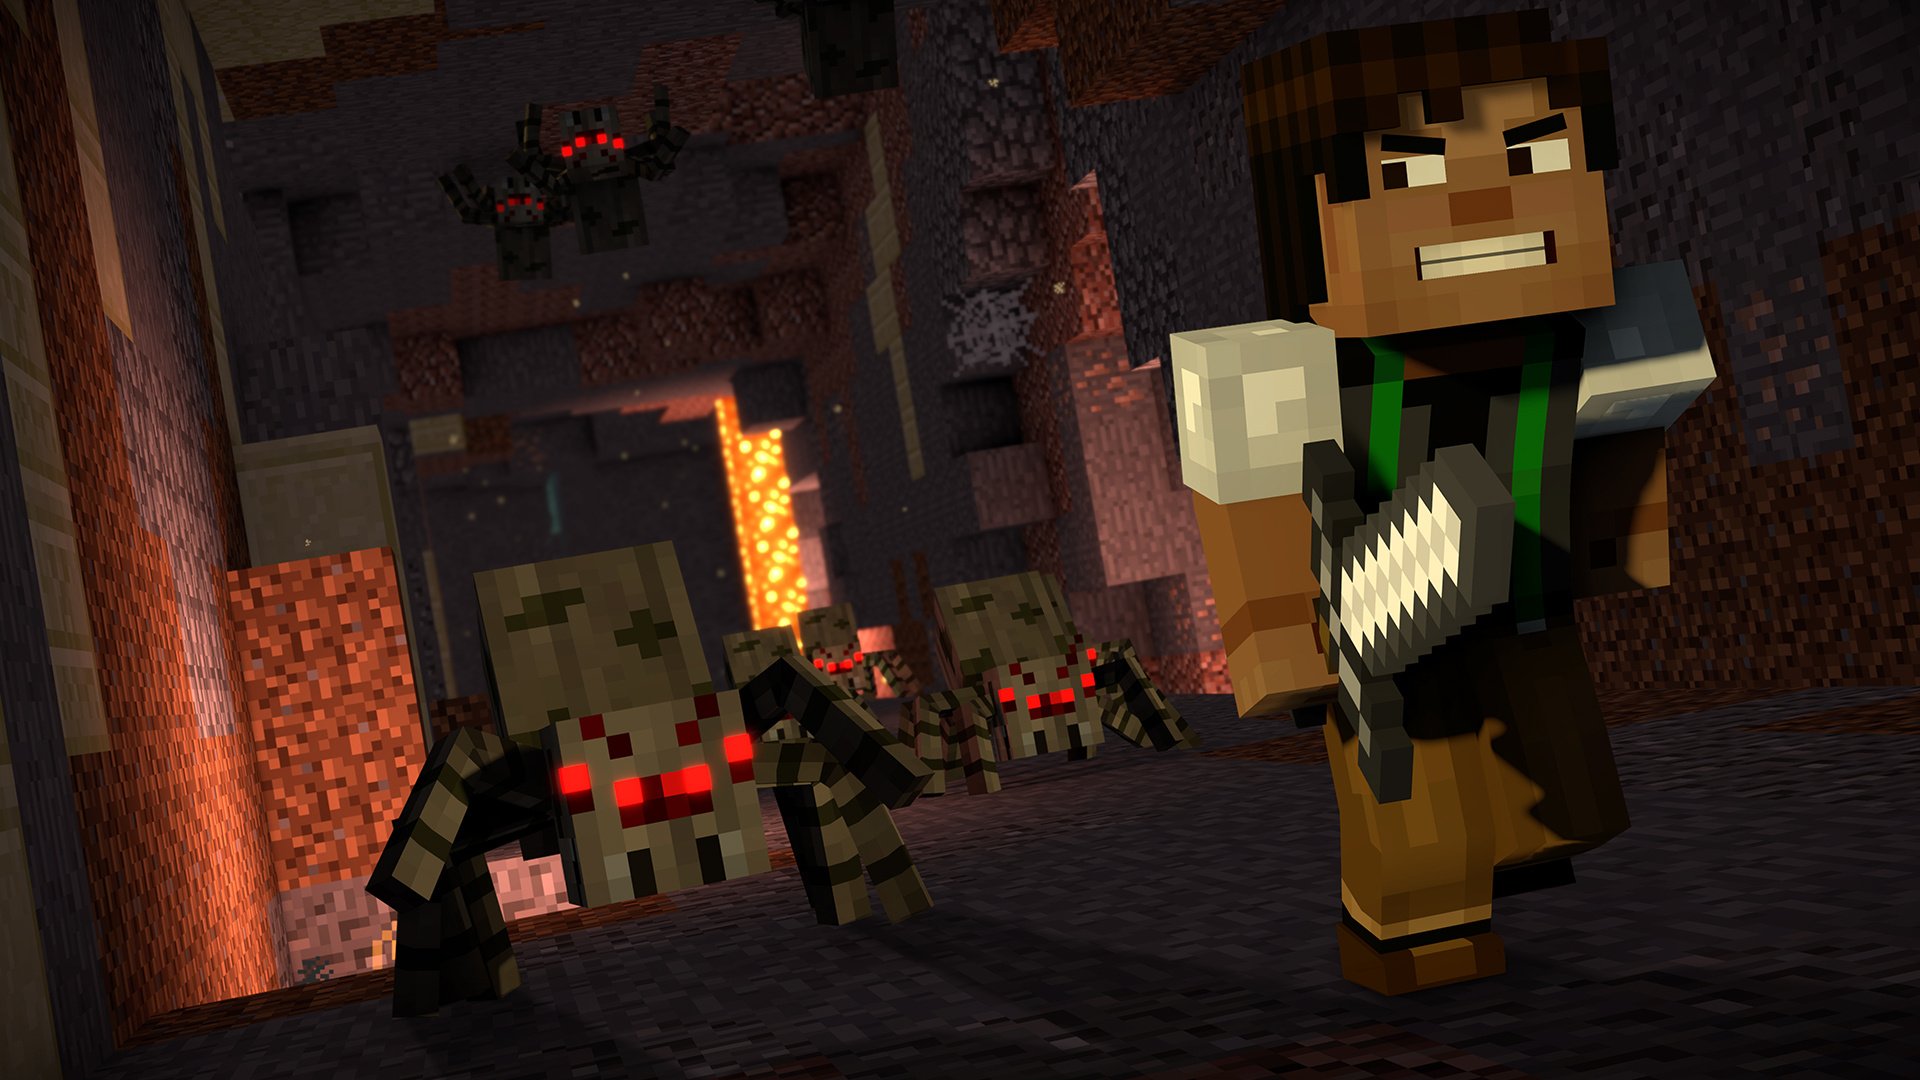 Wither storm vs Herobrine: Minecraft players talk about which boss they  want between the two